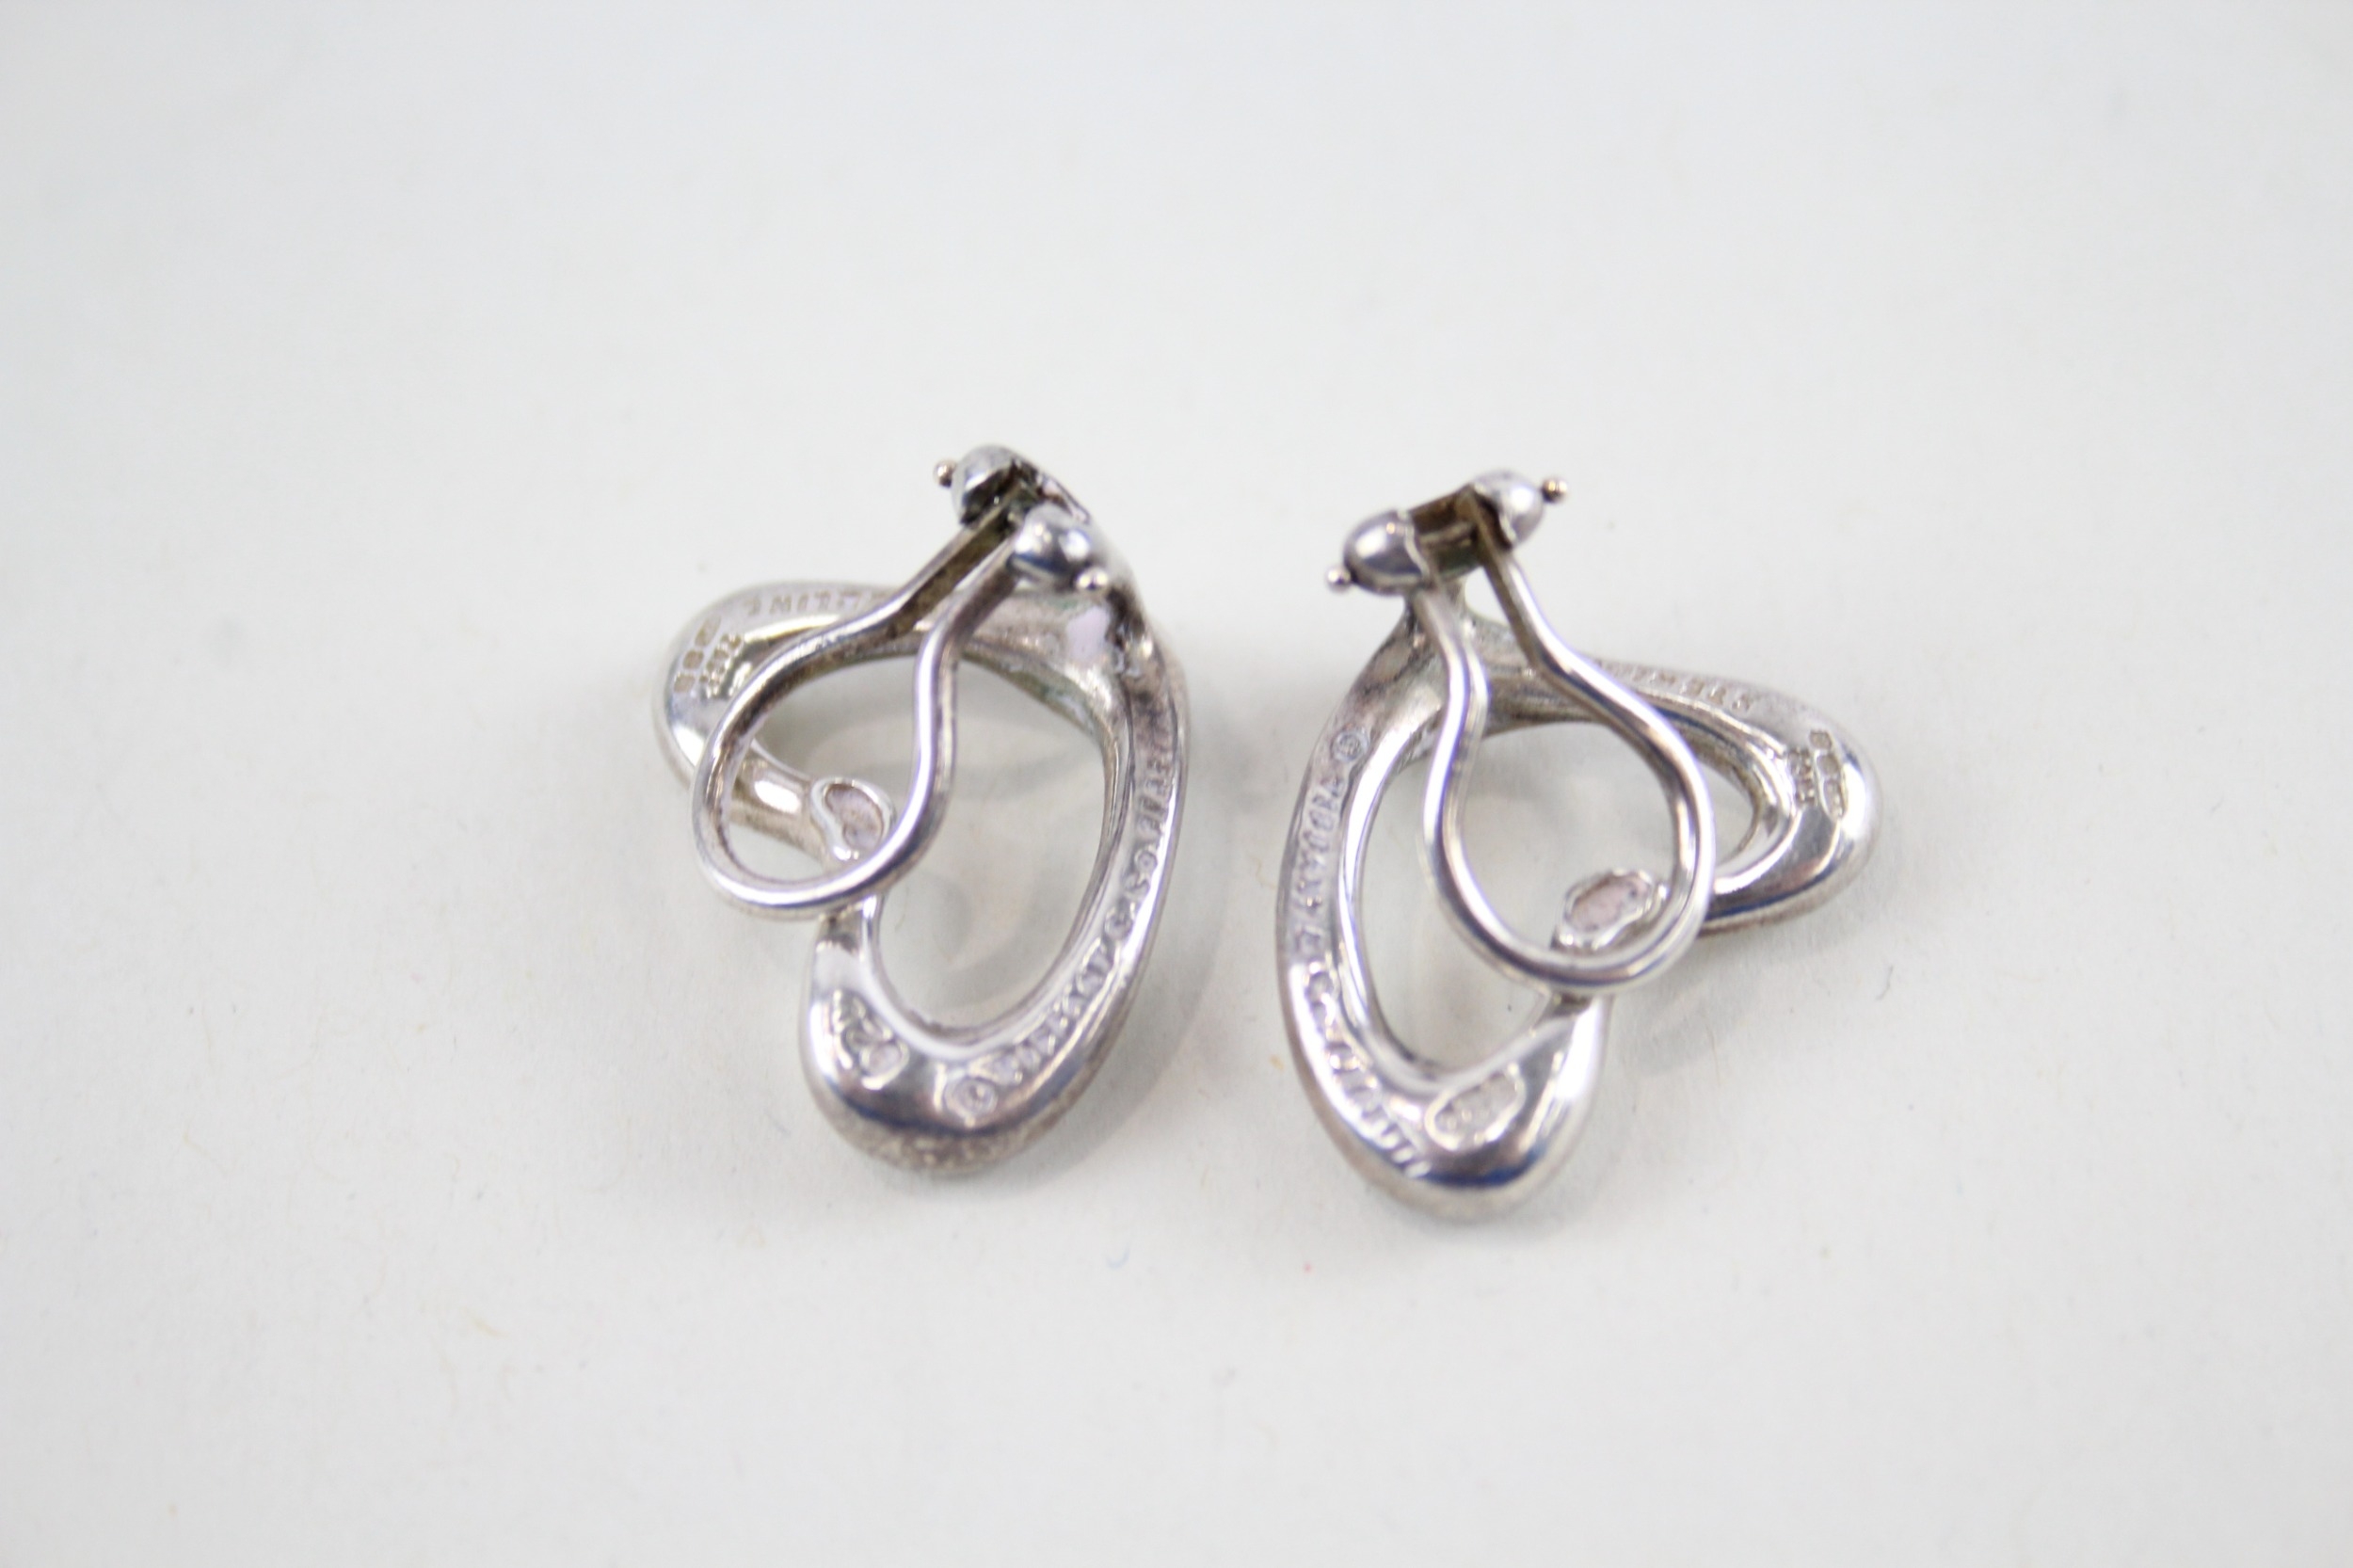 Pair of silver heart clip on earrings by designer Tiffany & Co (9g) - Image 4 of 4